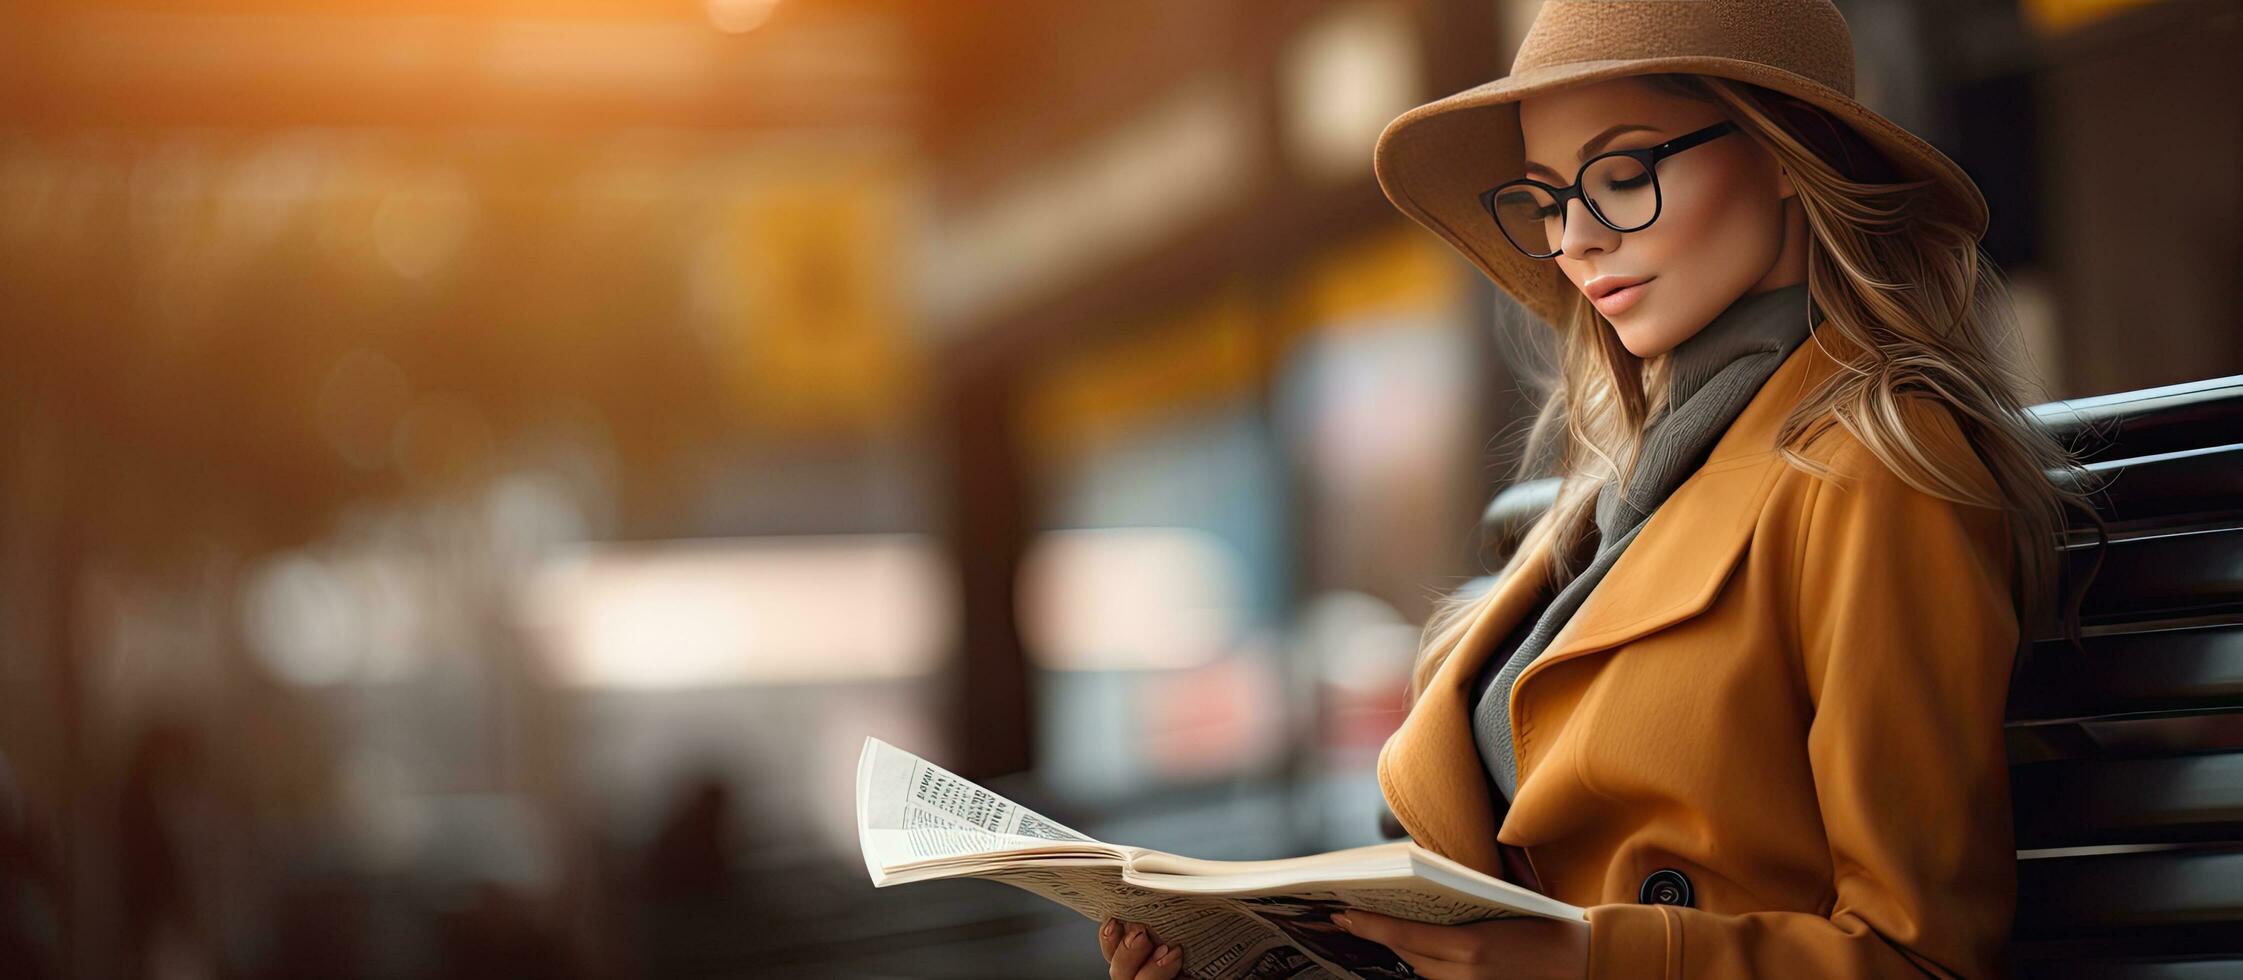 Fashionable woman in fall clothing gazes aside clutching magazine on bench in subway station photo